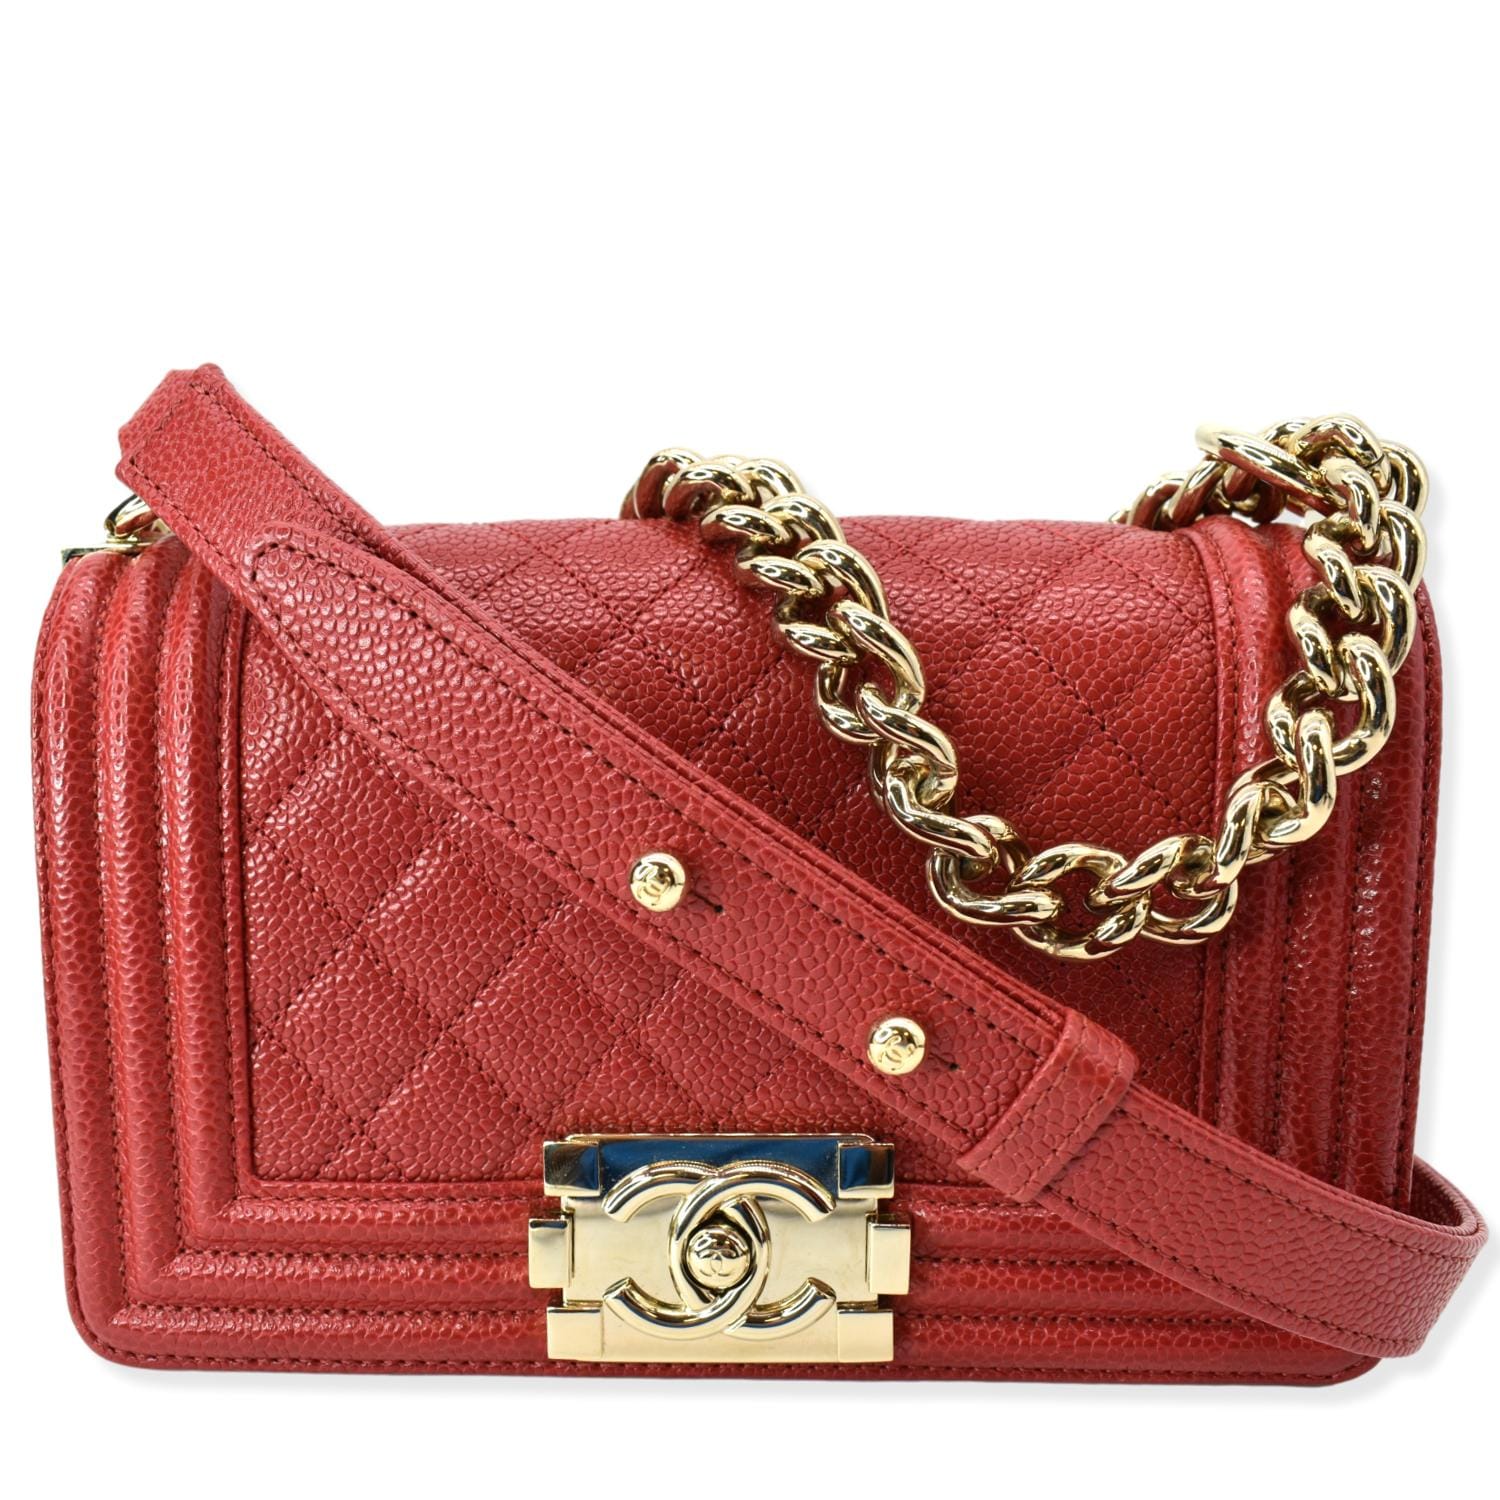 Chanel mini leboy bag from Trusted seller Ceci,Top Grade quality 1